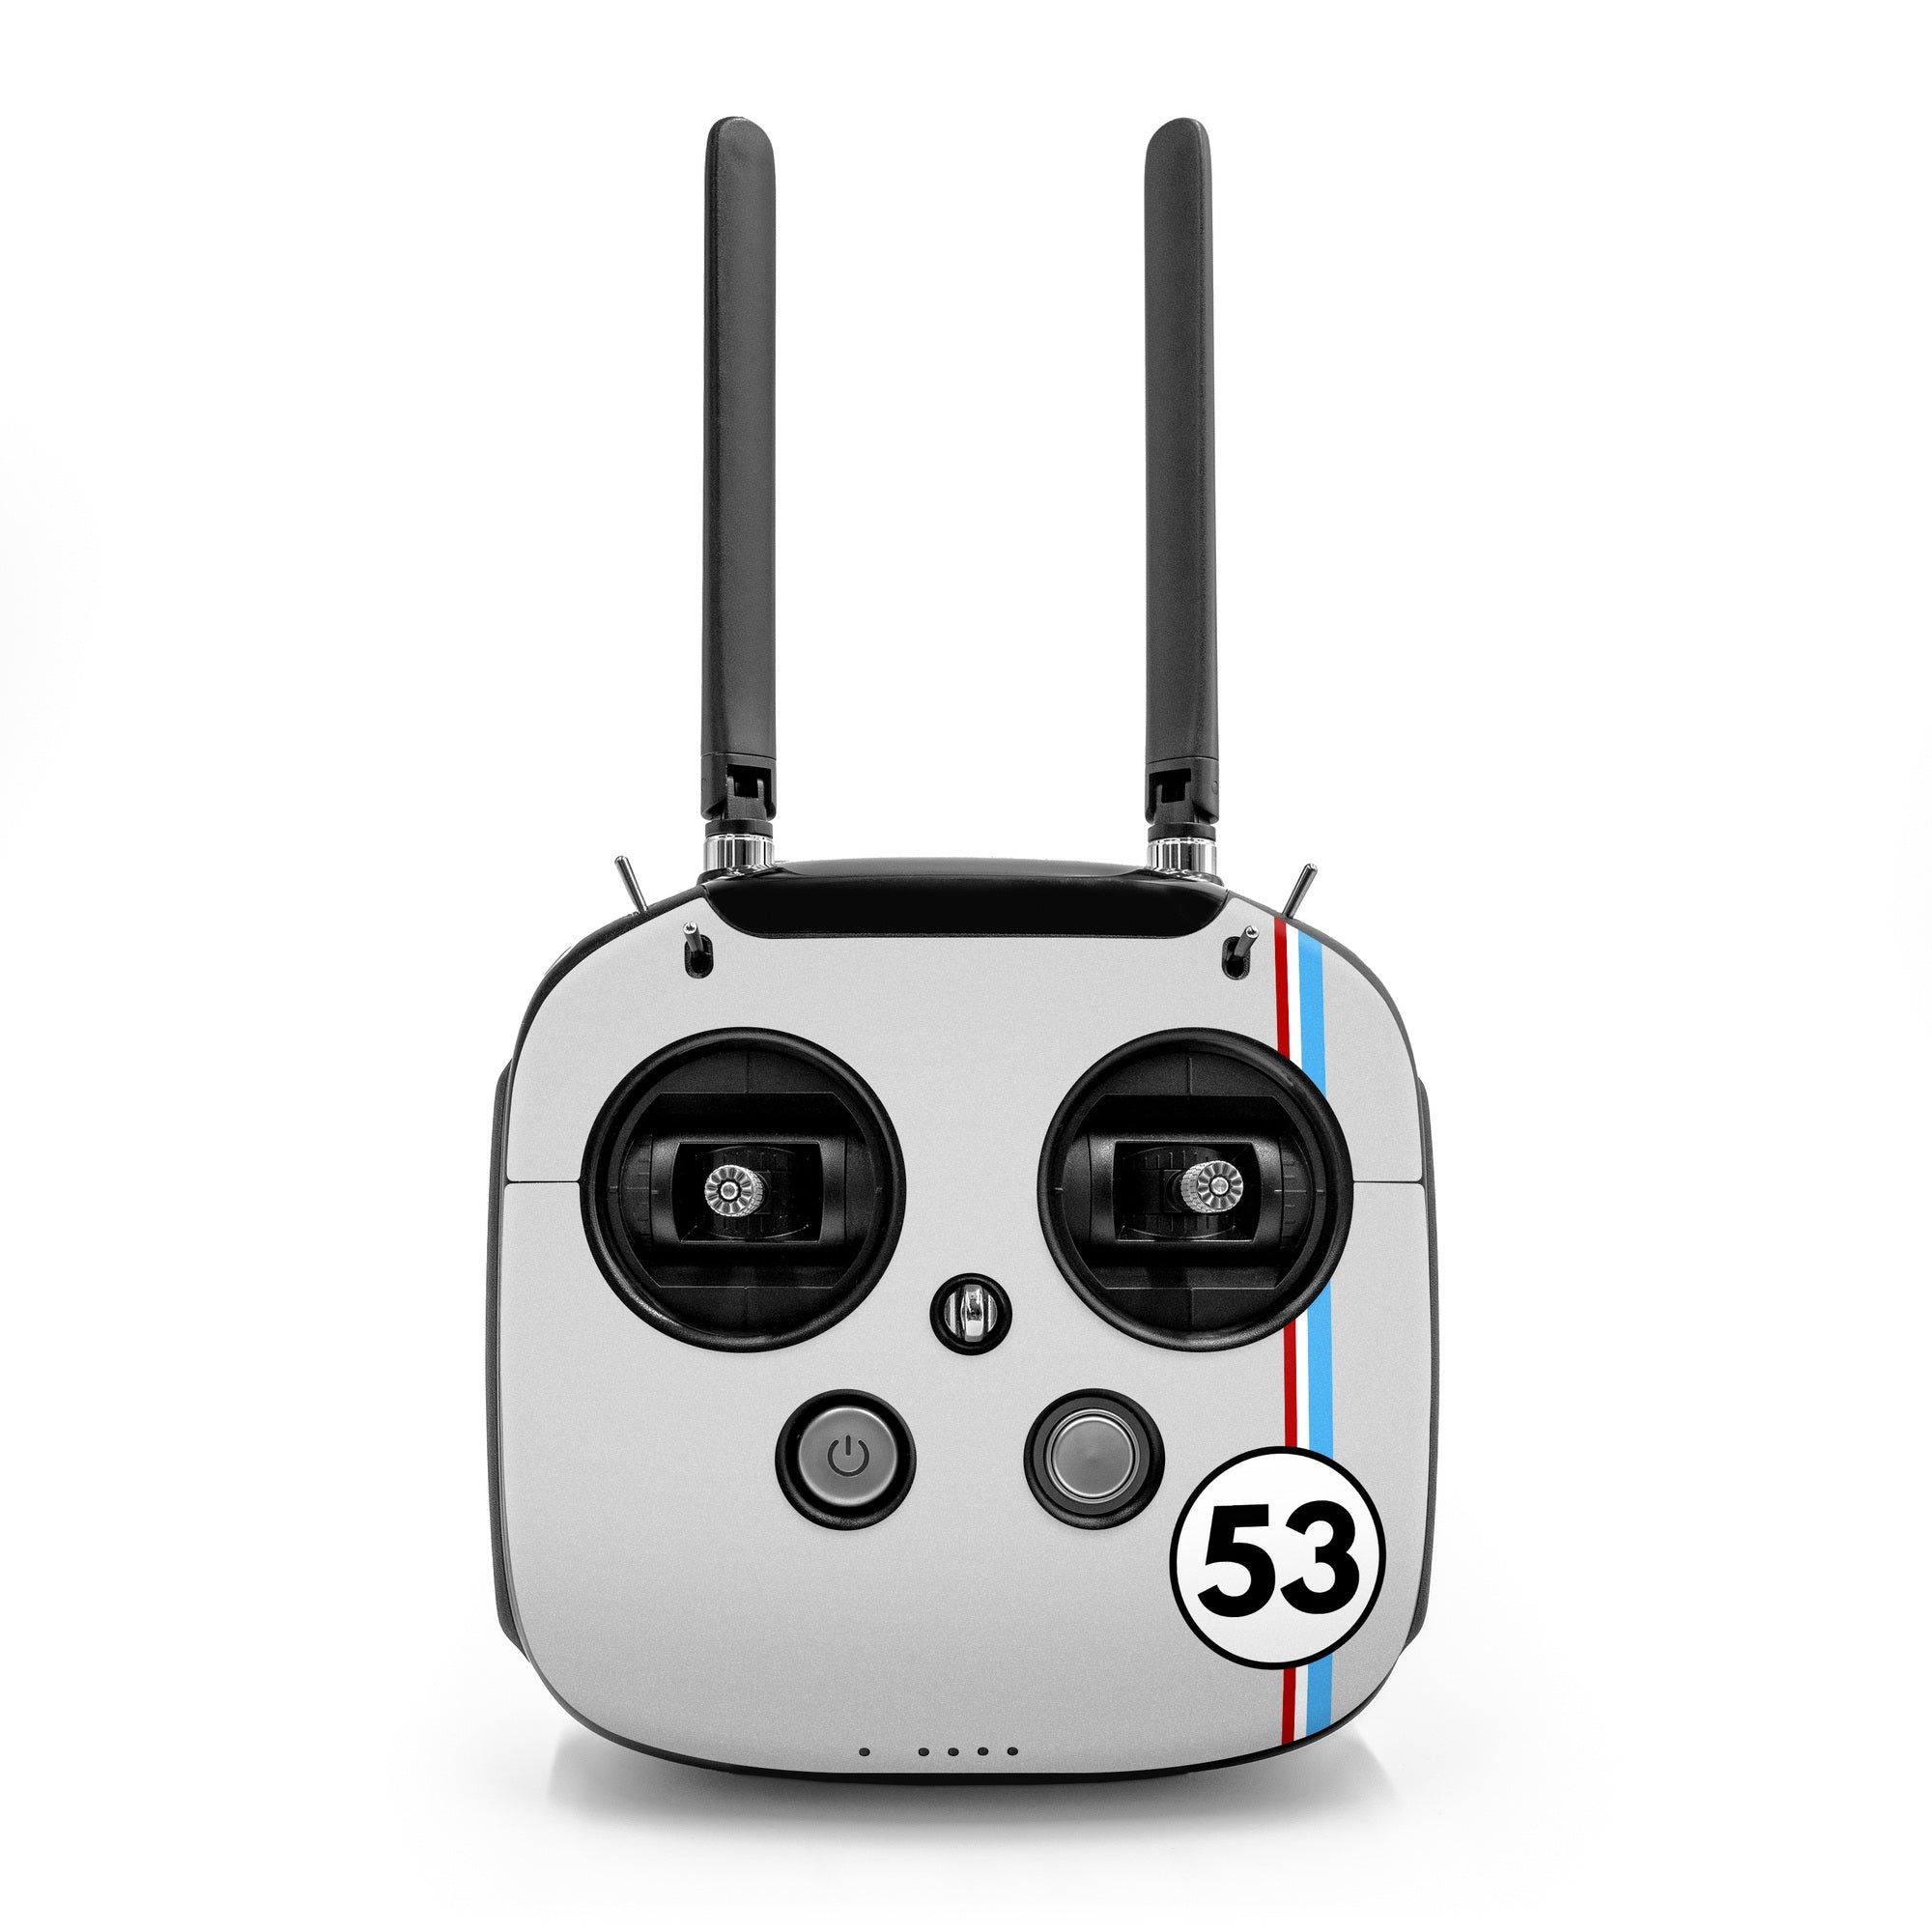 Herbert the Caring Insect - DJI FPV Remote Controller (Mode 2) Skin